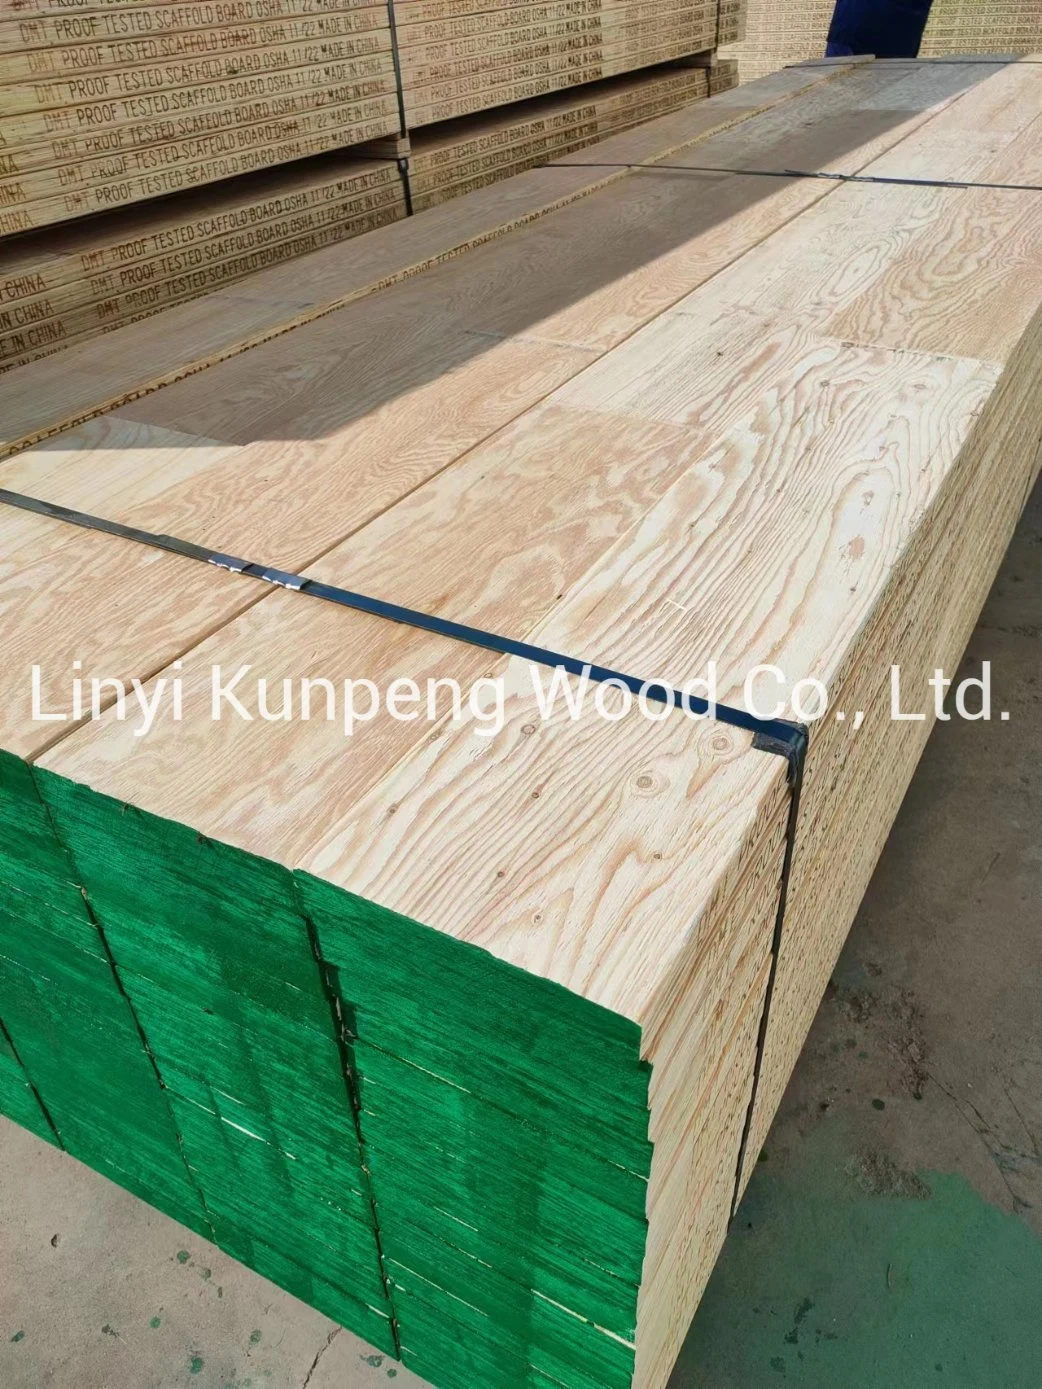 LVL Wooden Scaffold Planks for Scaffolding Construction